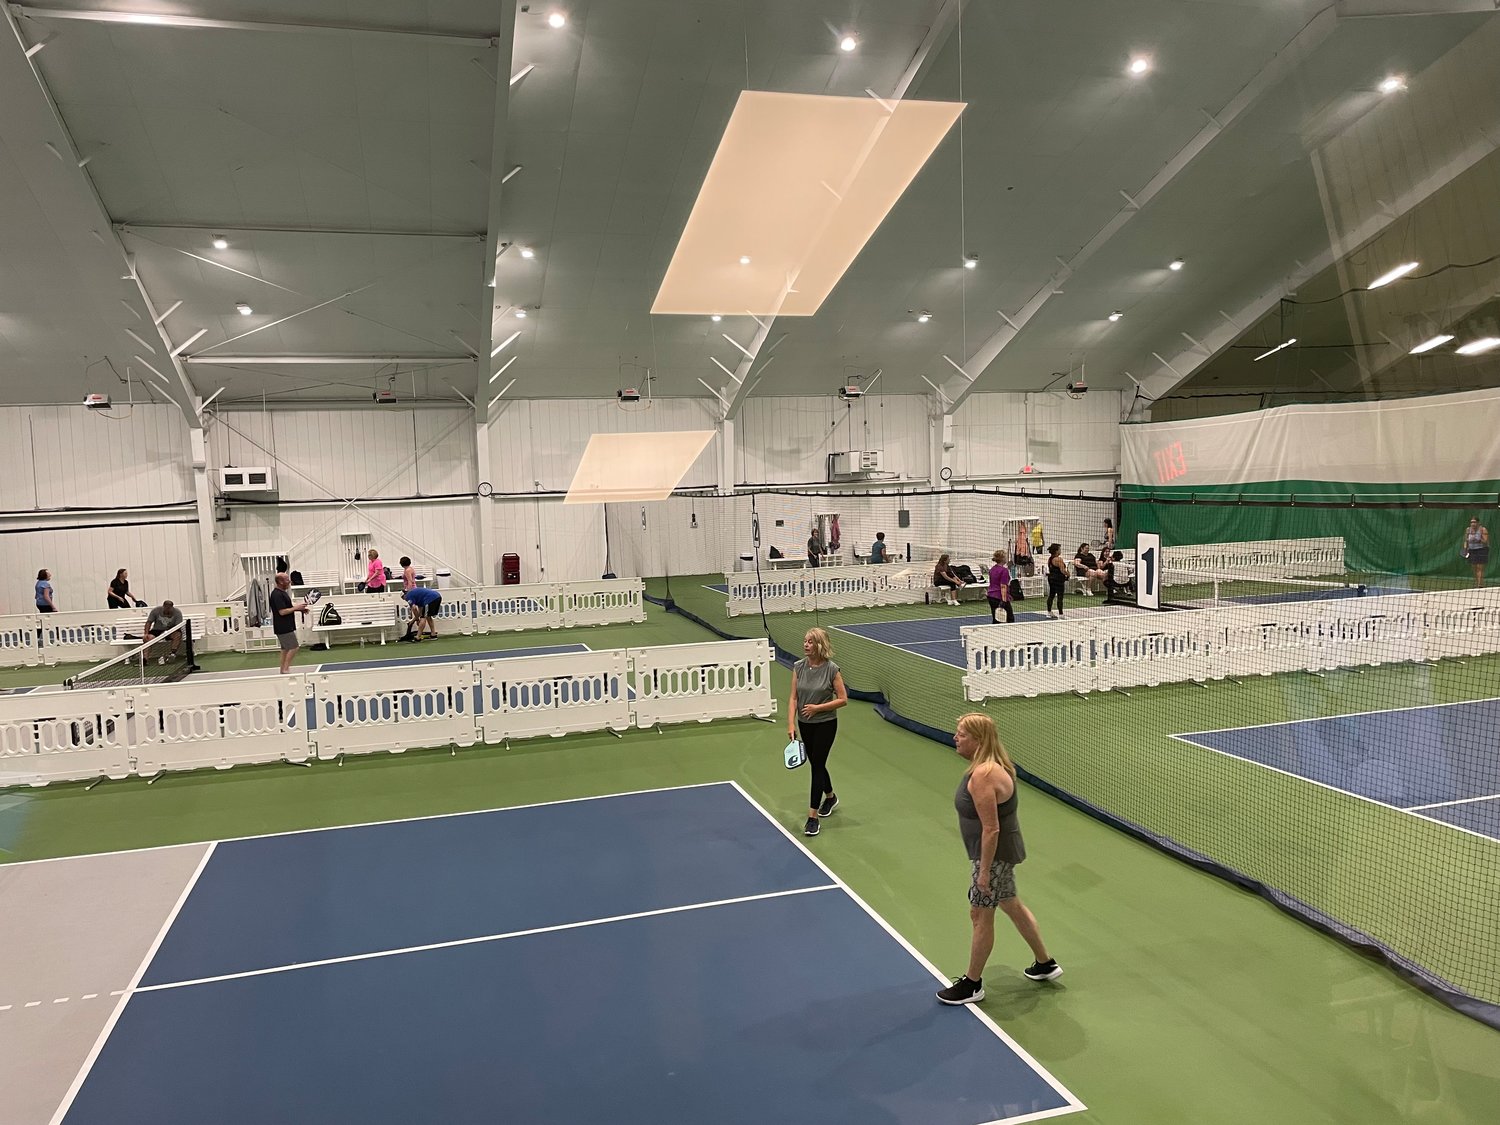 Just off the Southern State Parkway in West Hempstead, the facility boasts six pickleball courts, a tennis court and an artificial-turf field.